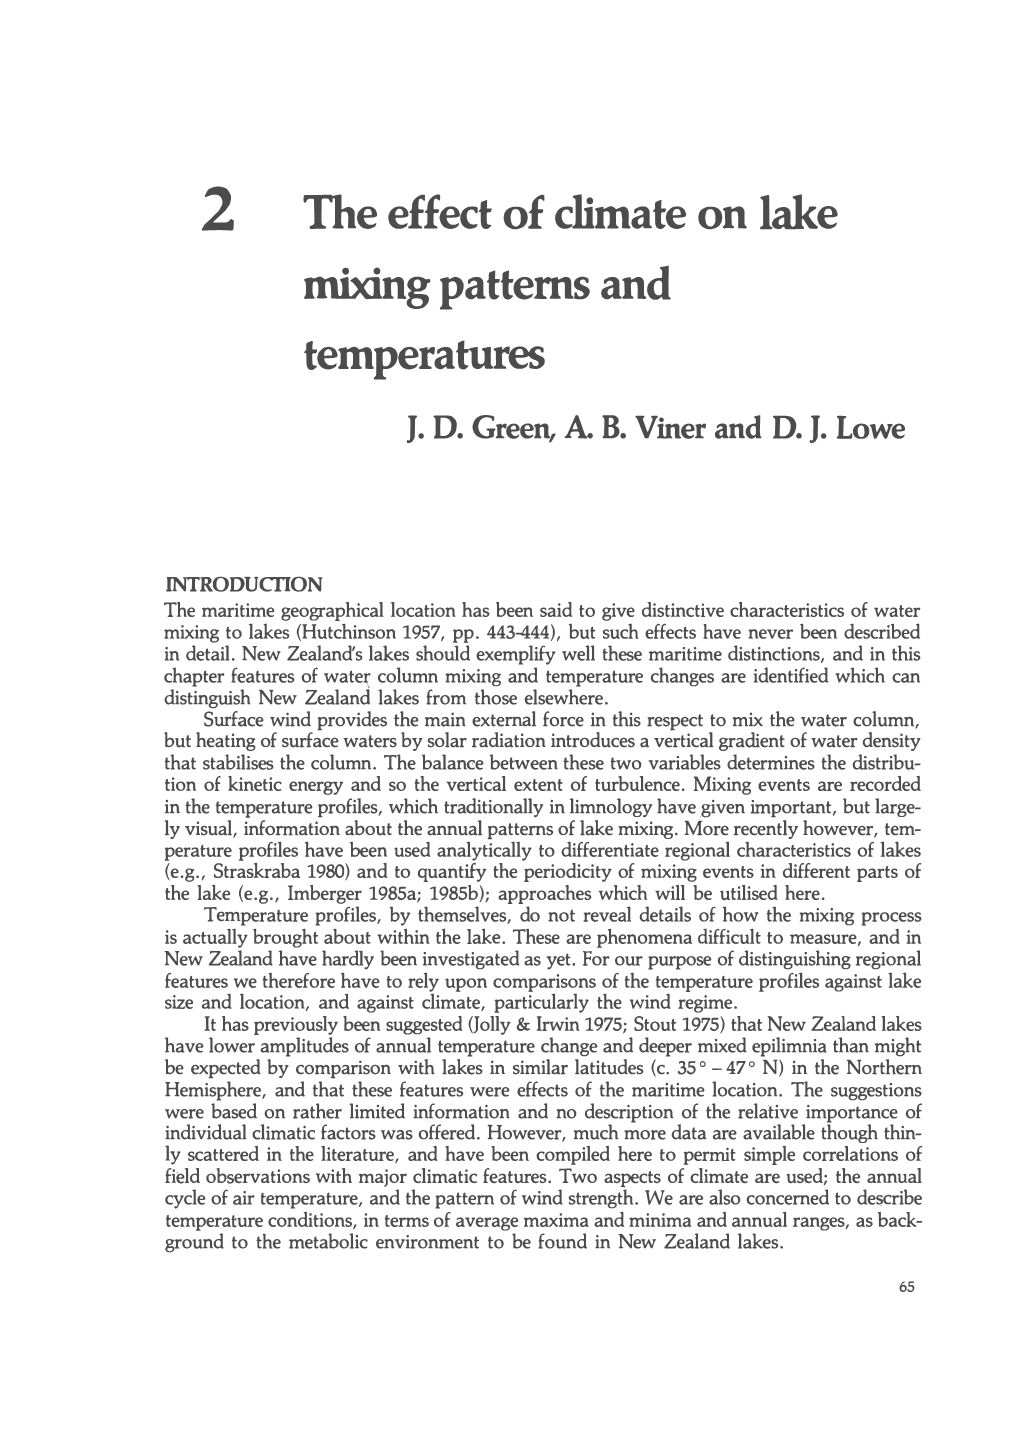 2 the Effect of Climate on Lake Mixing Patterns and Temperatures